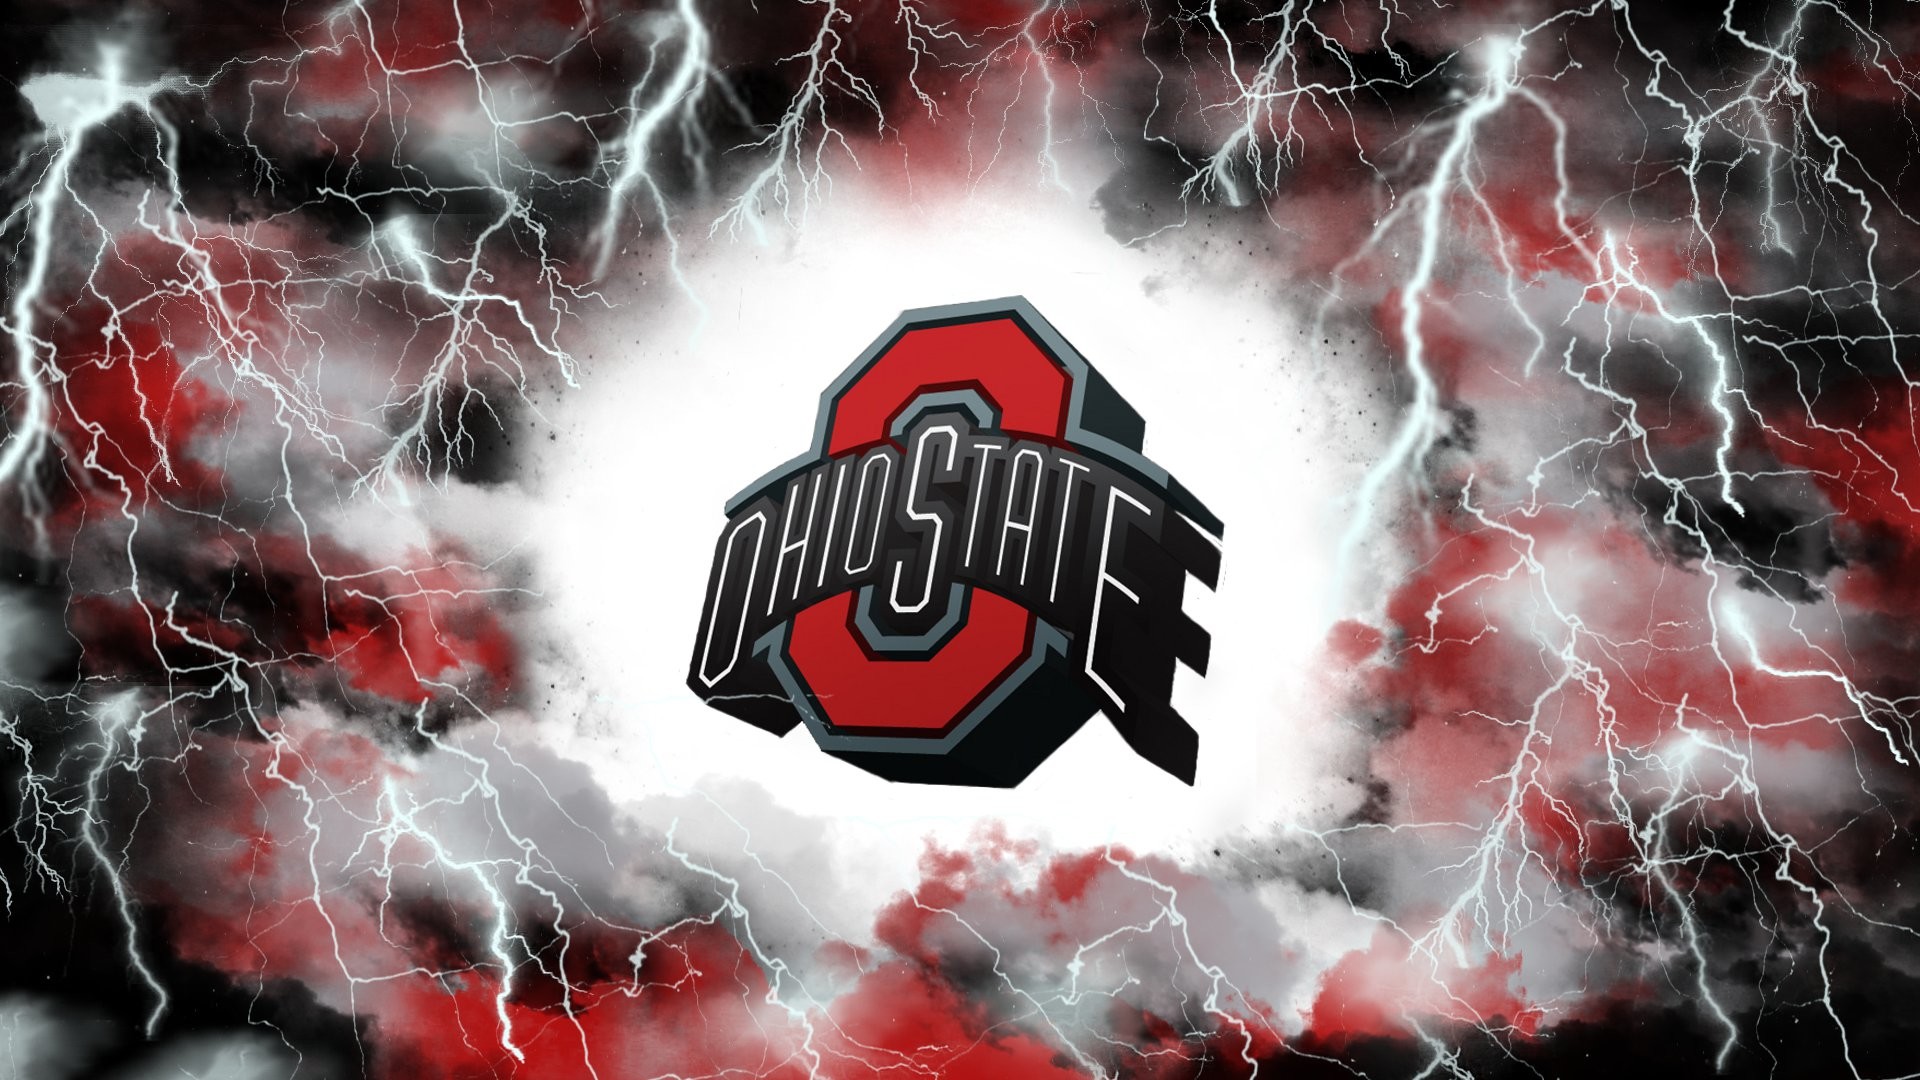 1920x1080 ohio state football osu wallpaper hd wallpapers high definition amazing desktop  wallpapers for windows apple mac tablet free 1920Ã1080 Wallpaper HD